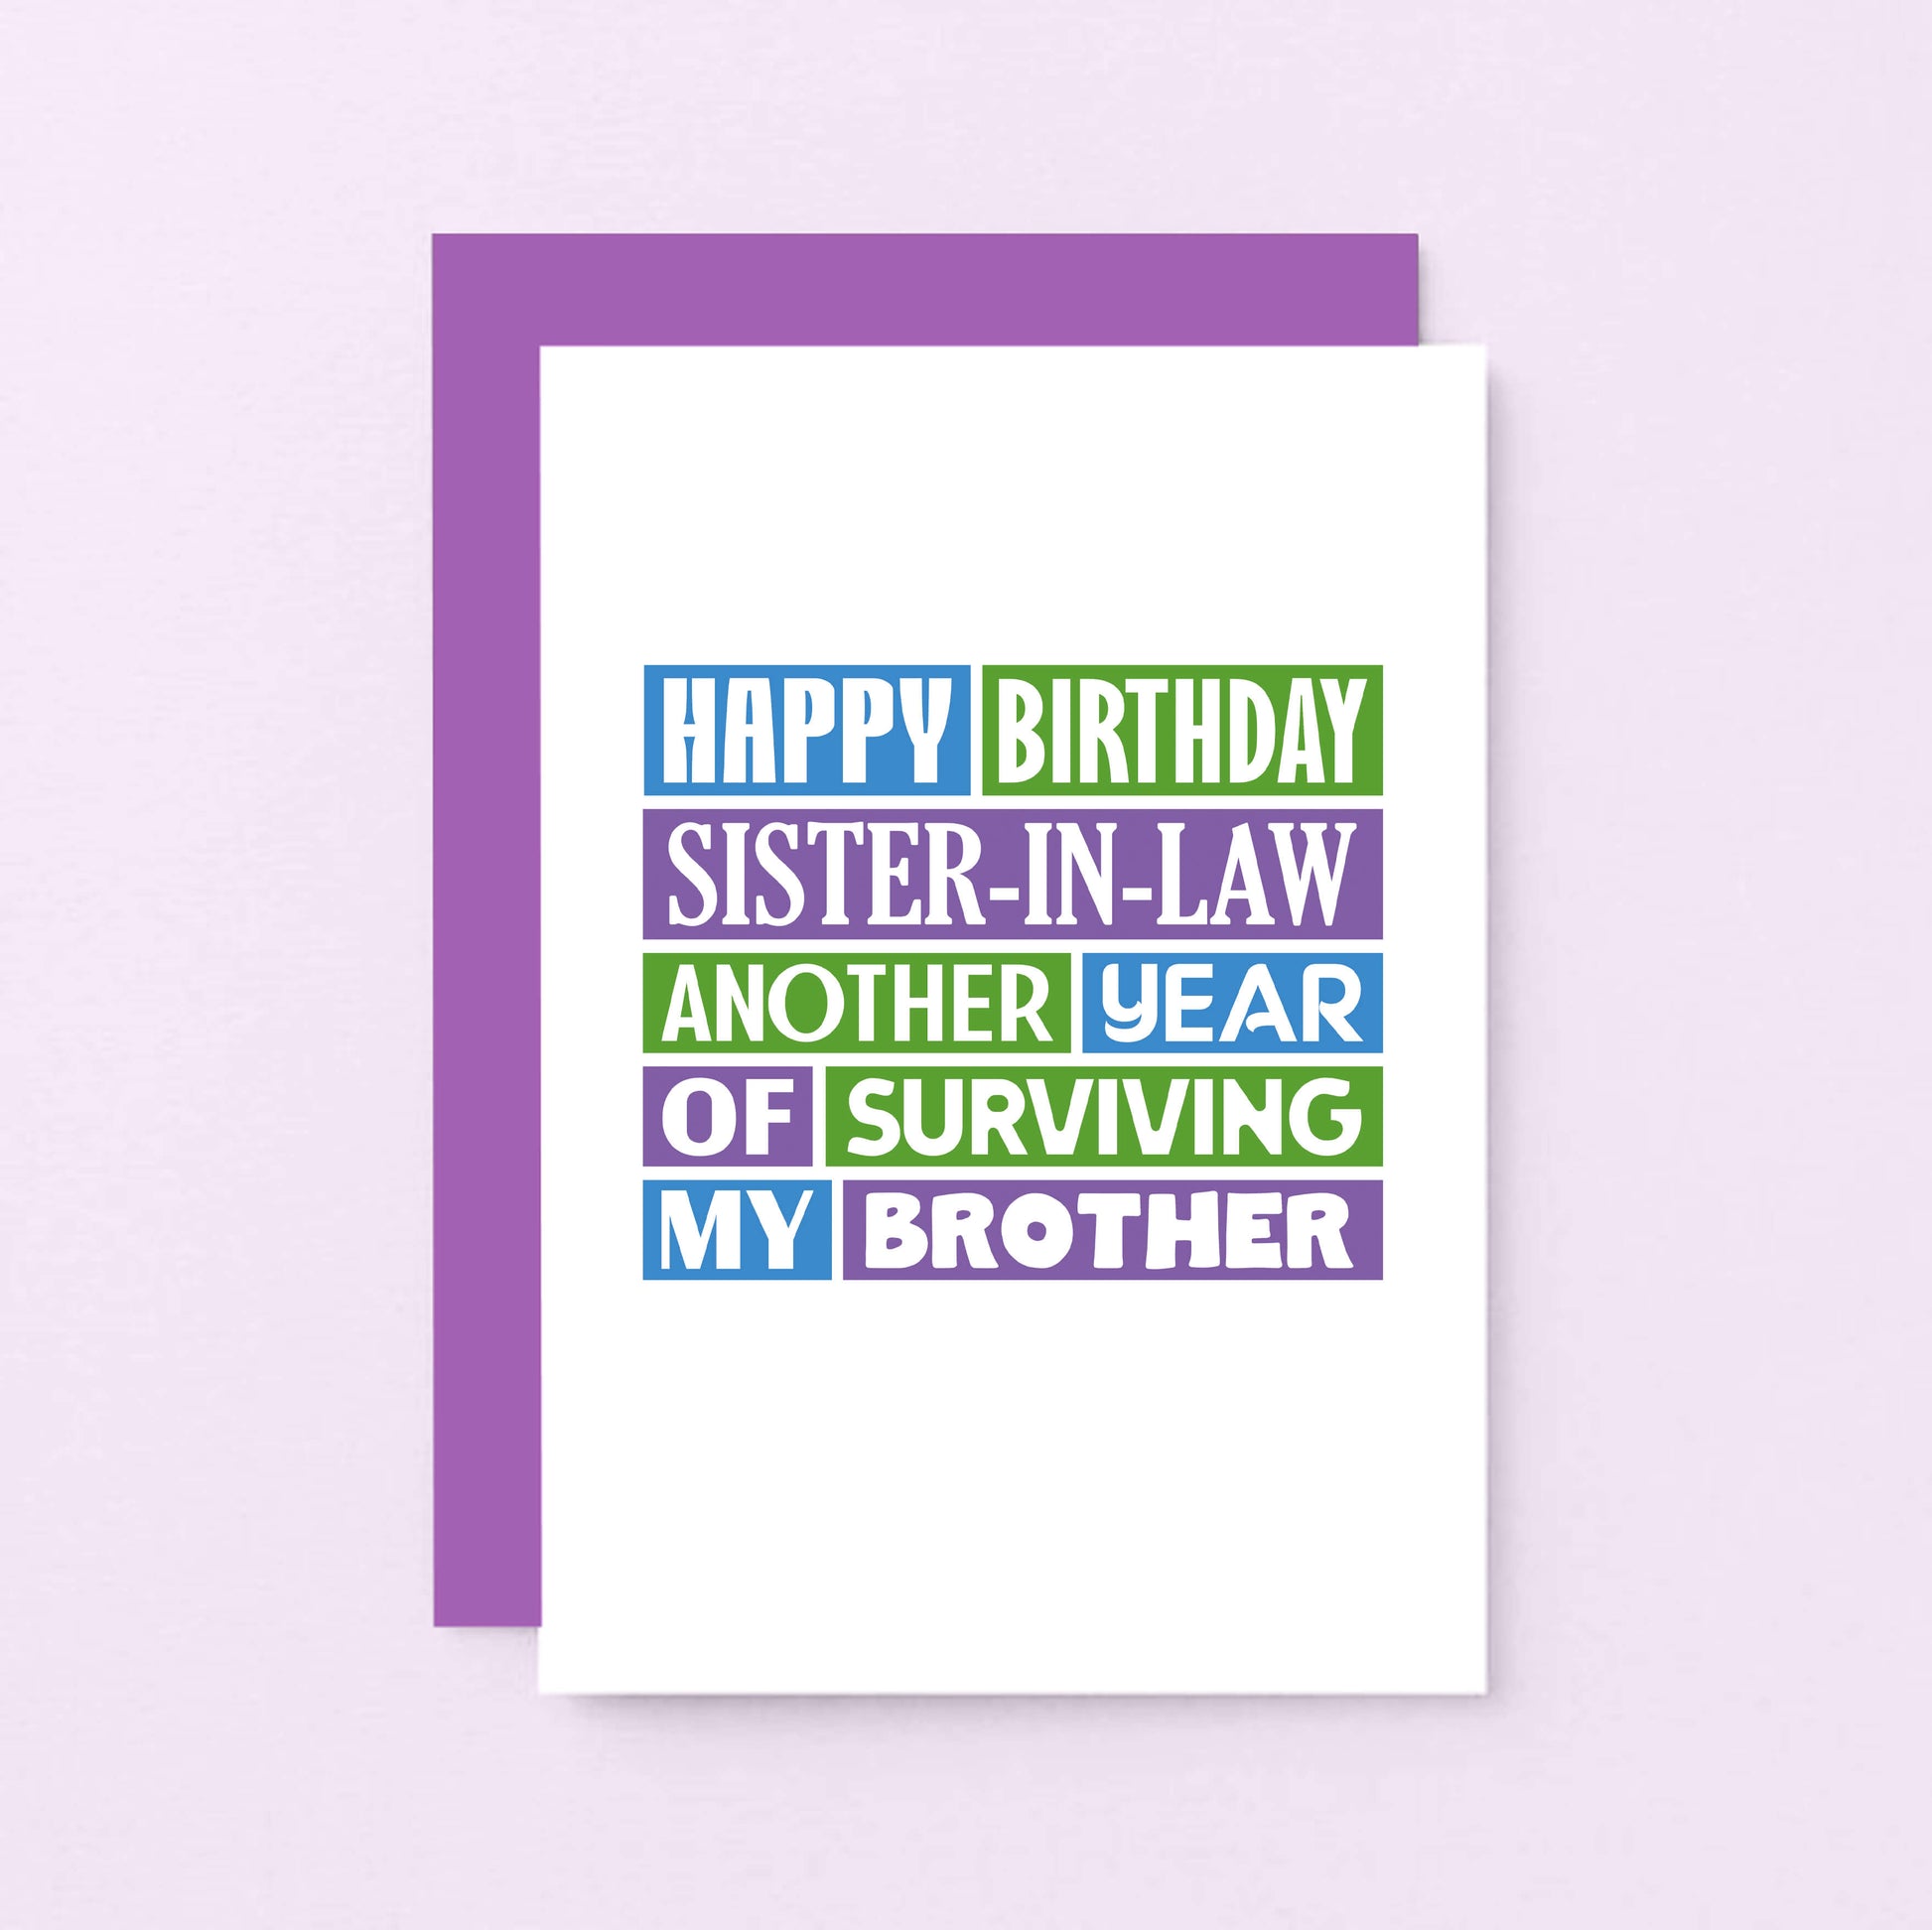 Sister in Law Birthday Card by SixElevenCreations. Reads Happy birthday sister-in-law. Another year of surviving my brother. Product Code SE0182A6